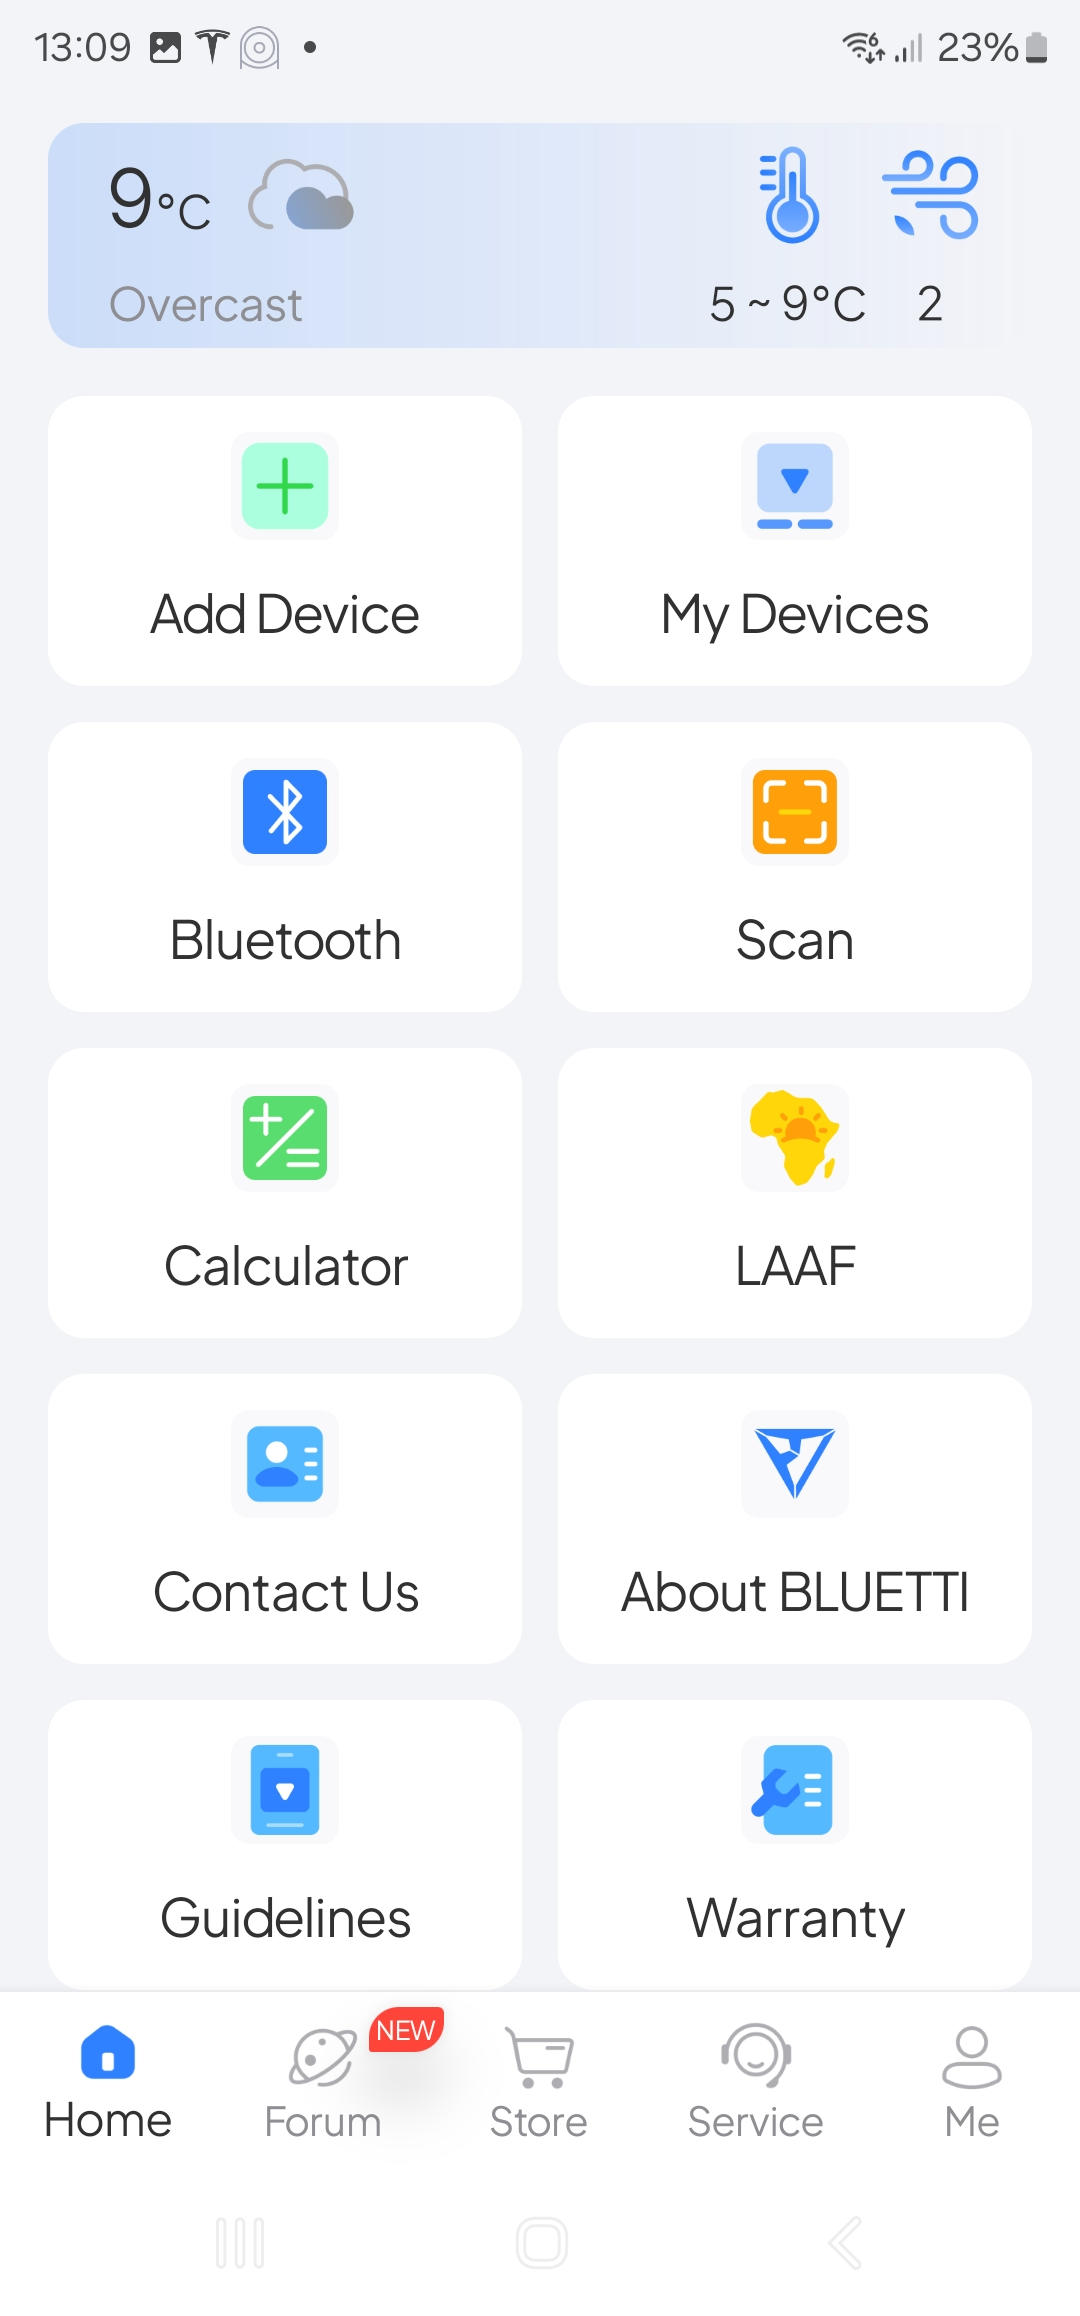 Bluetti app in use during our review